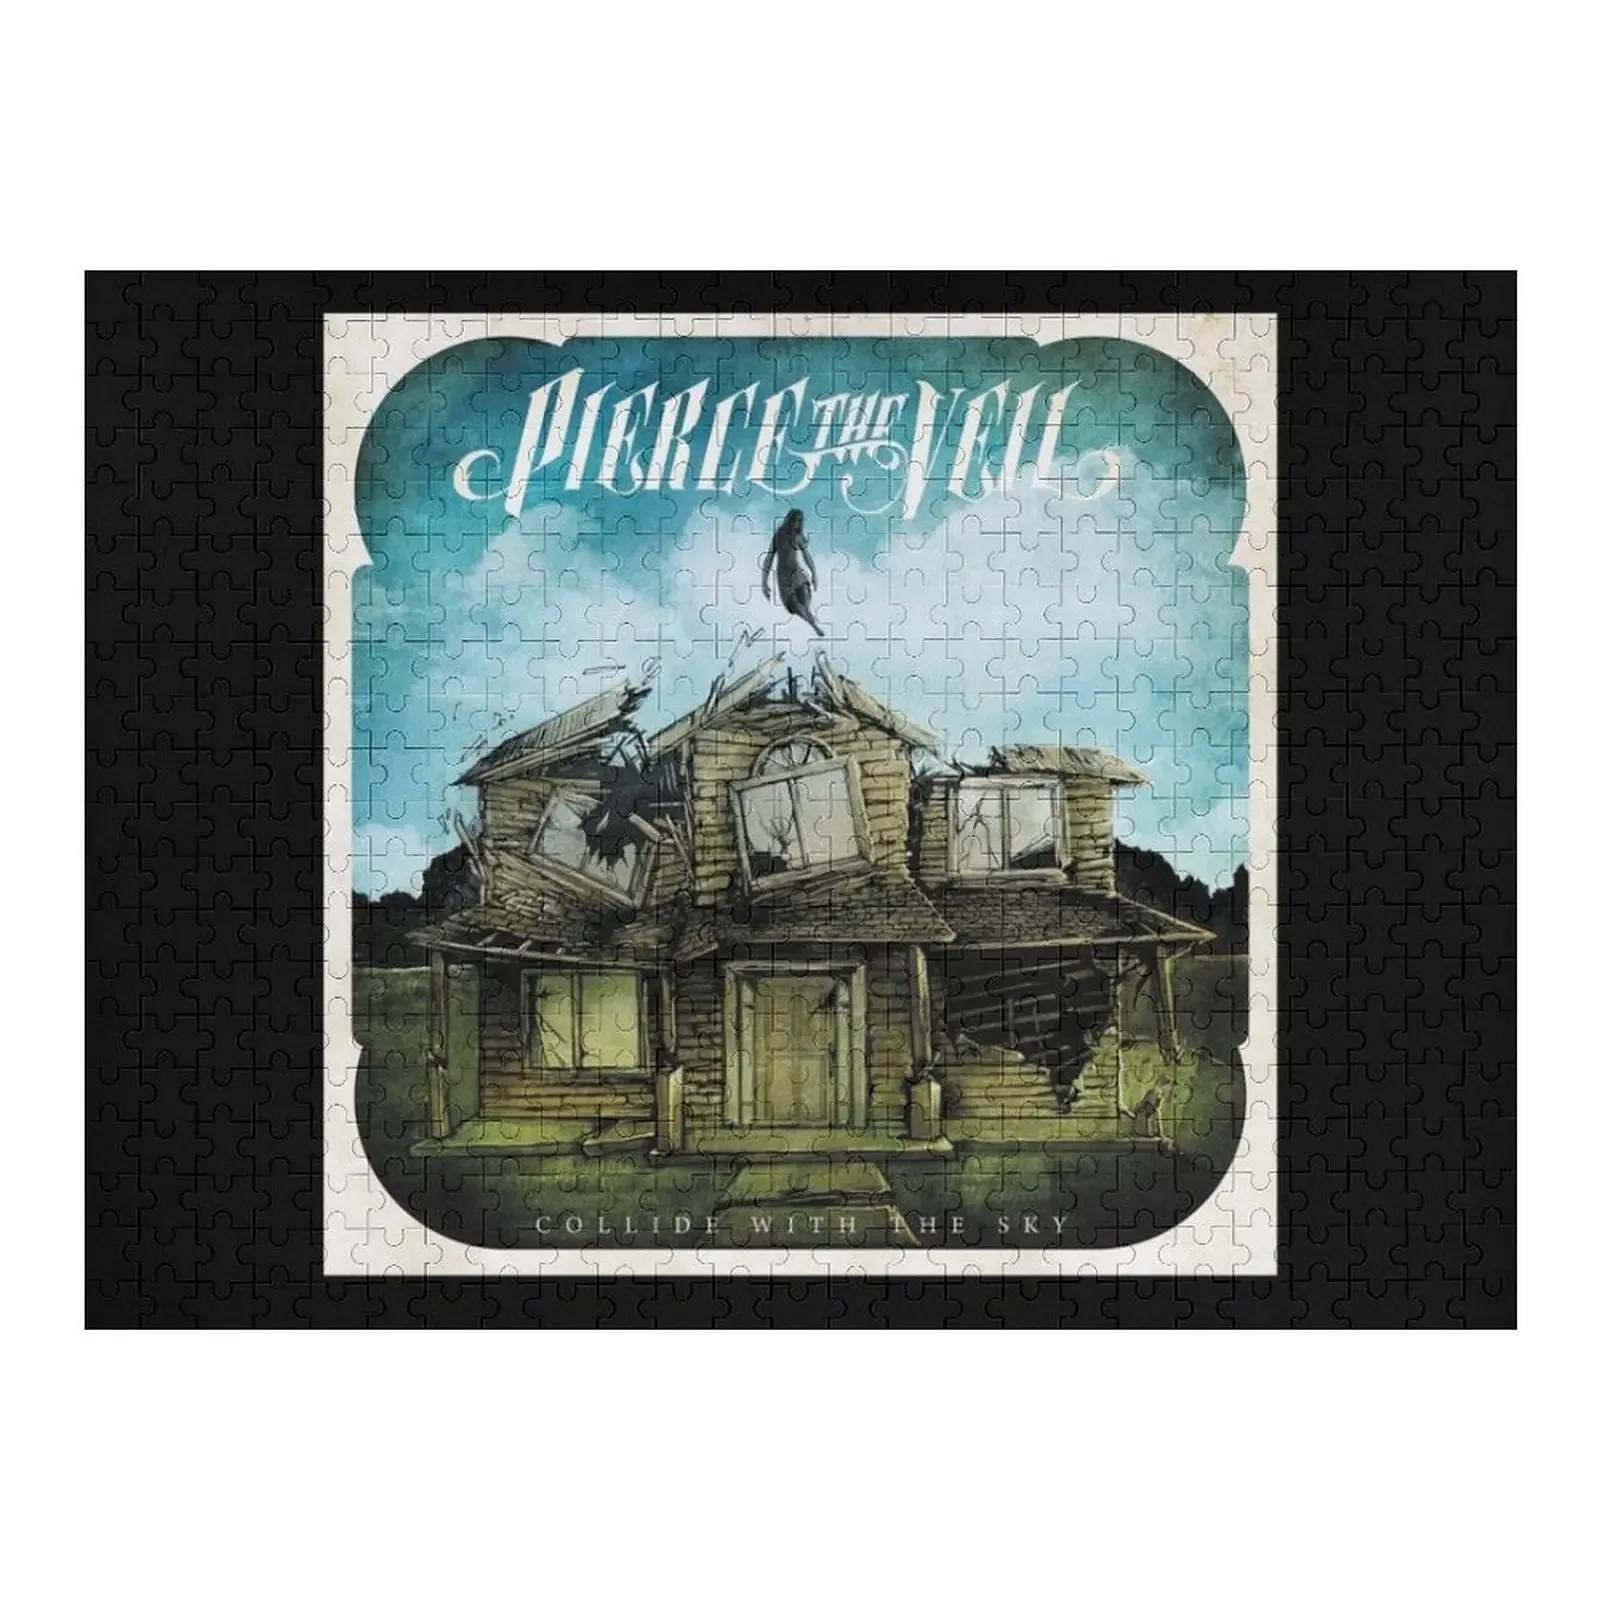 Pierce the Veil collide with the sky Jigsaw Puzzle Iq Wooden Adults Puzzle new bridal veil velos de novia free shipping white ivory tulle short wedding veil with combe sequin beaded 2 layer in stock